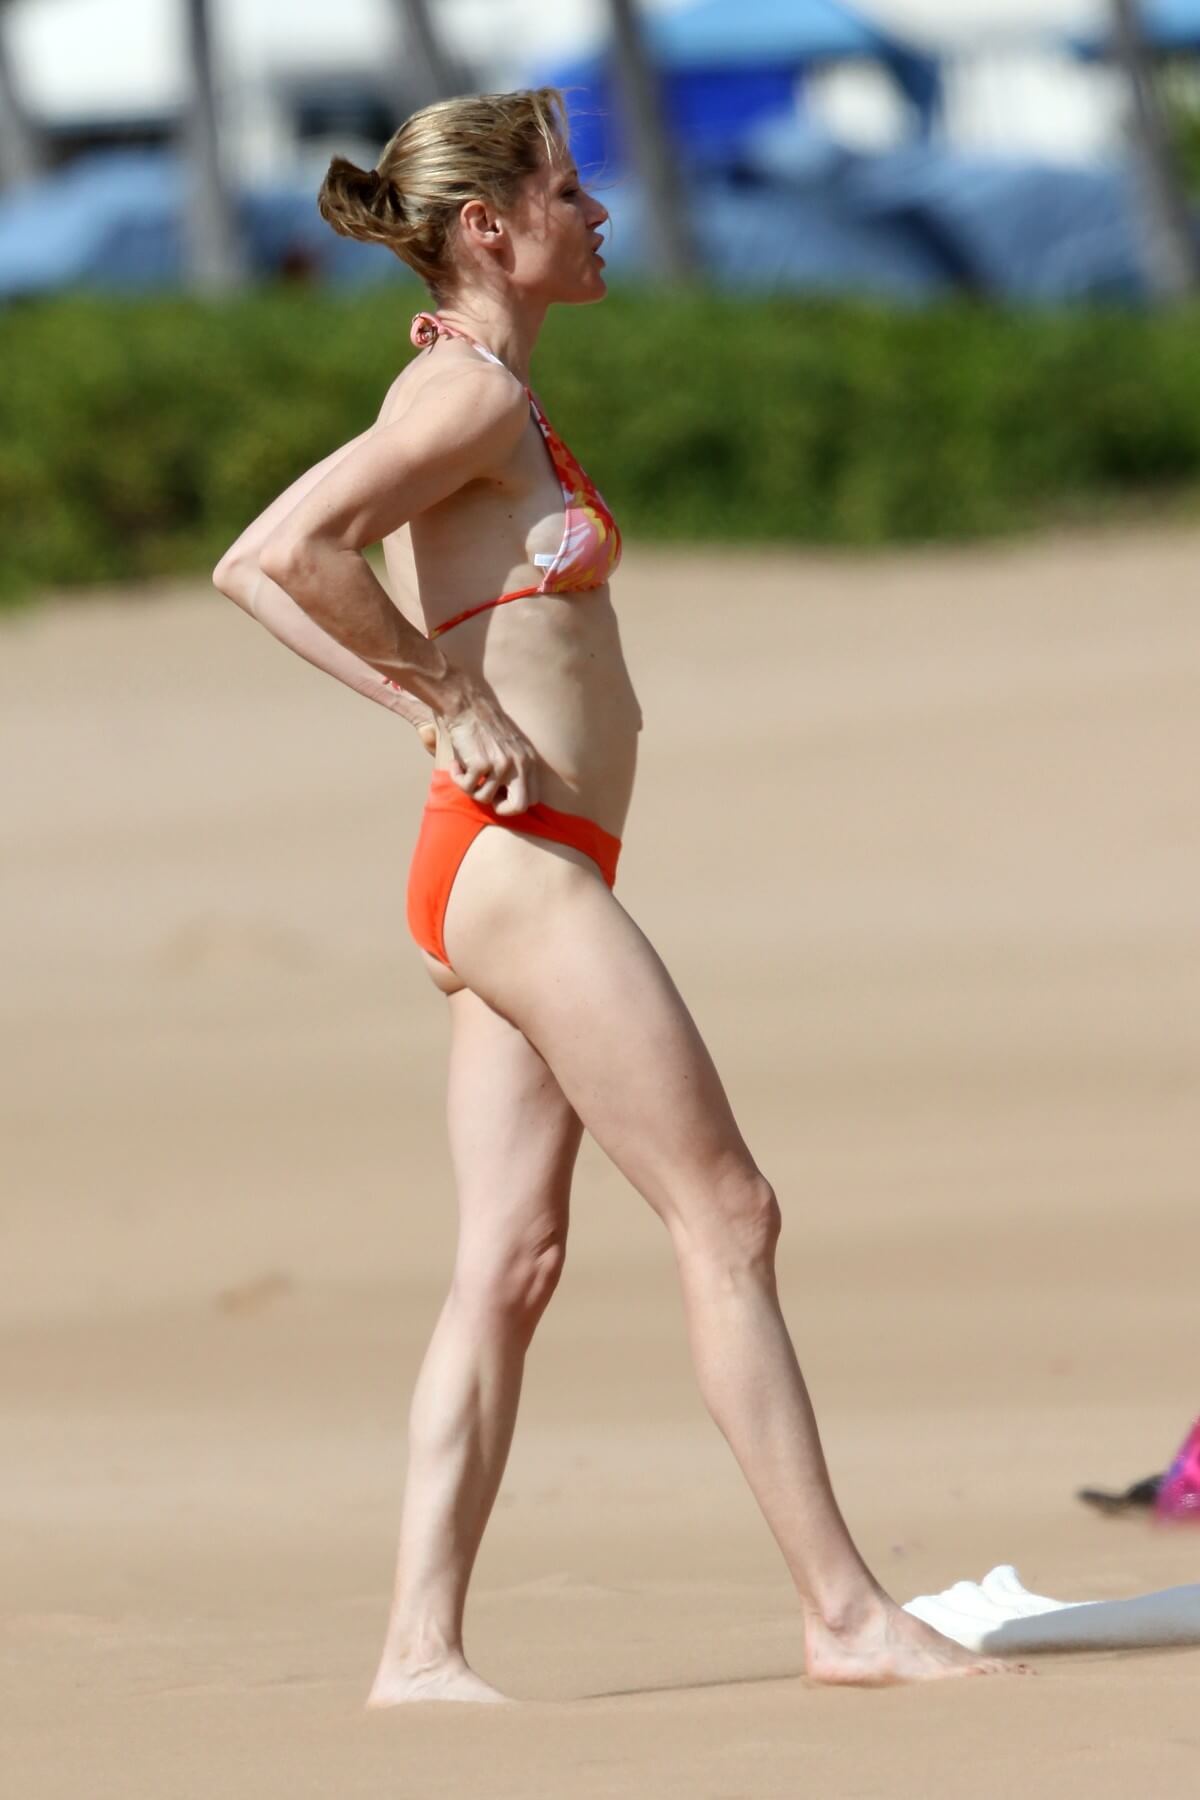 49 Hottest Julie Bowen bikini Pictures Will Make You An Addict Of Her Beaut...